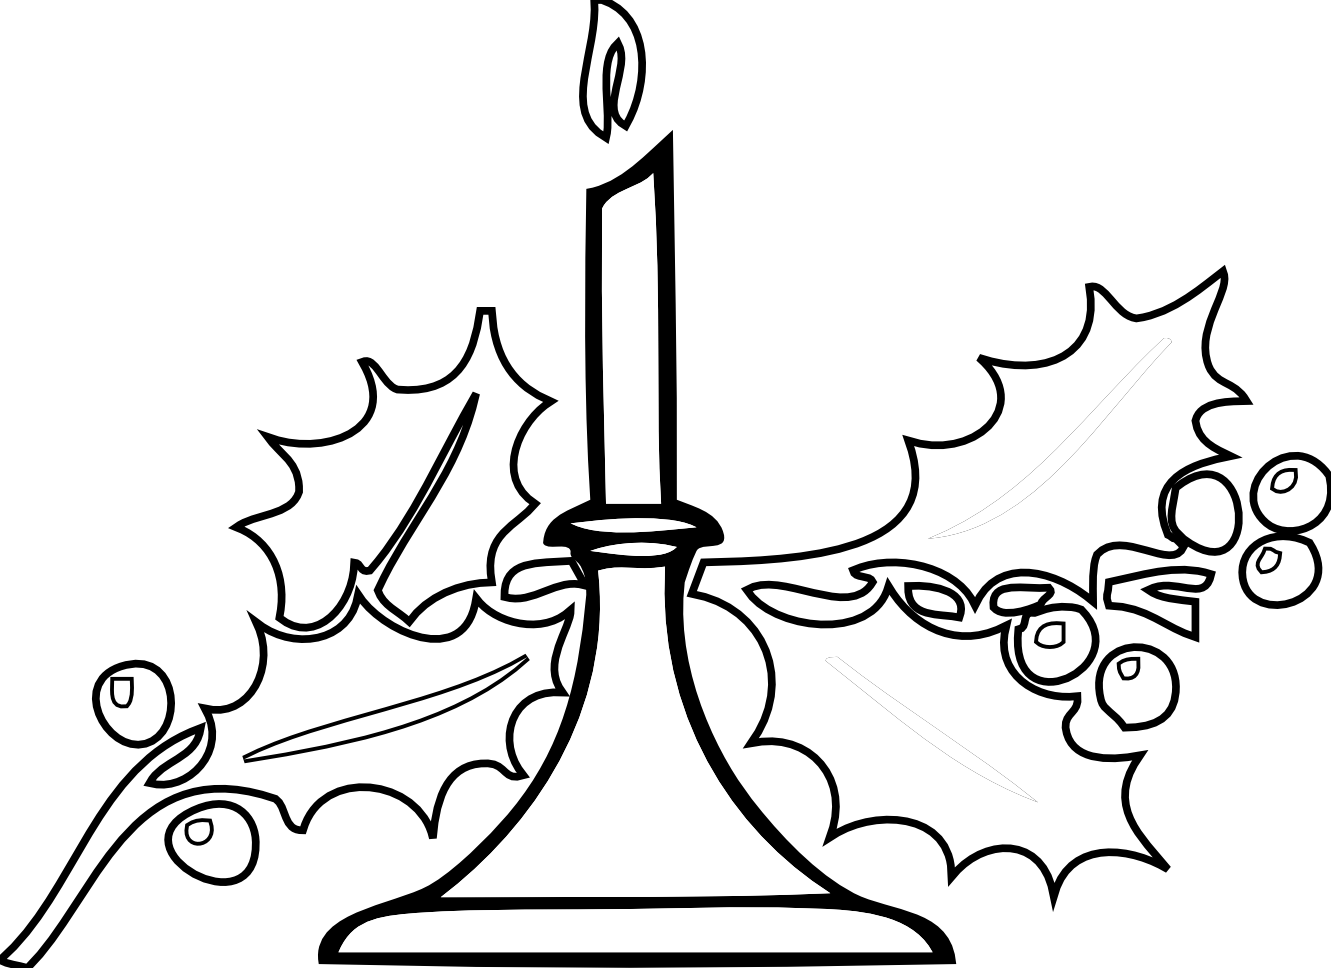 candle clip art free black and white - photo #41